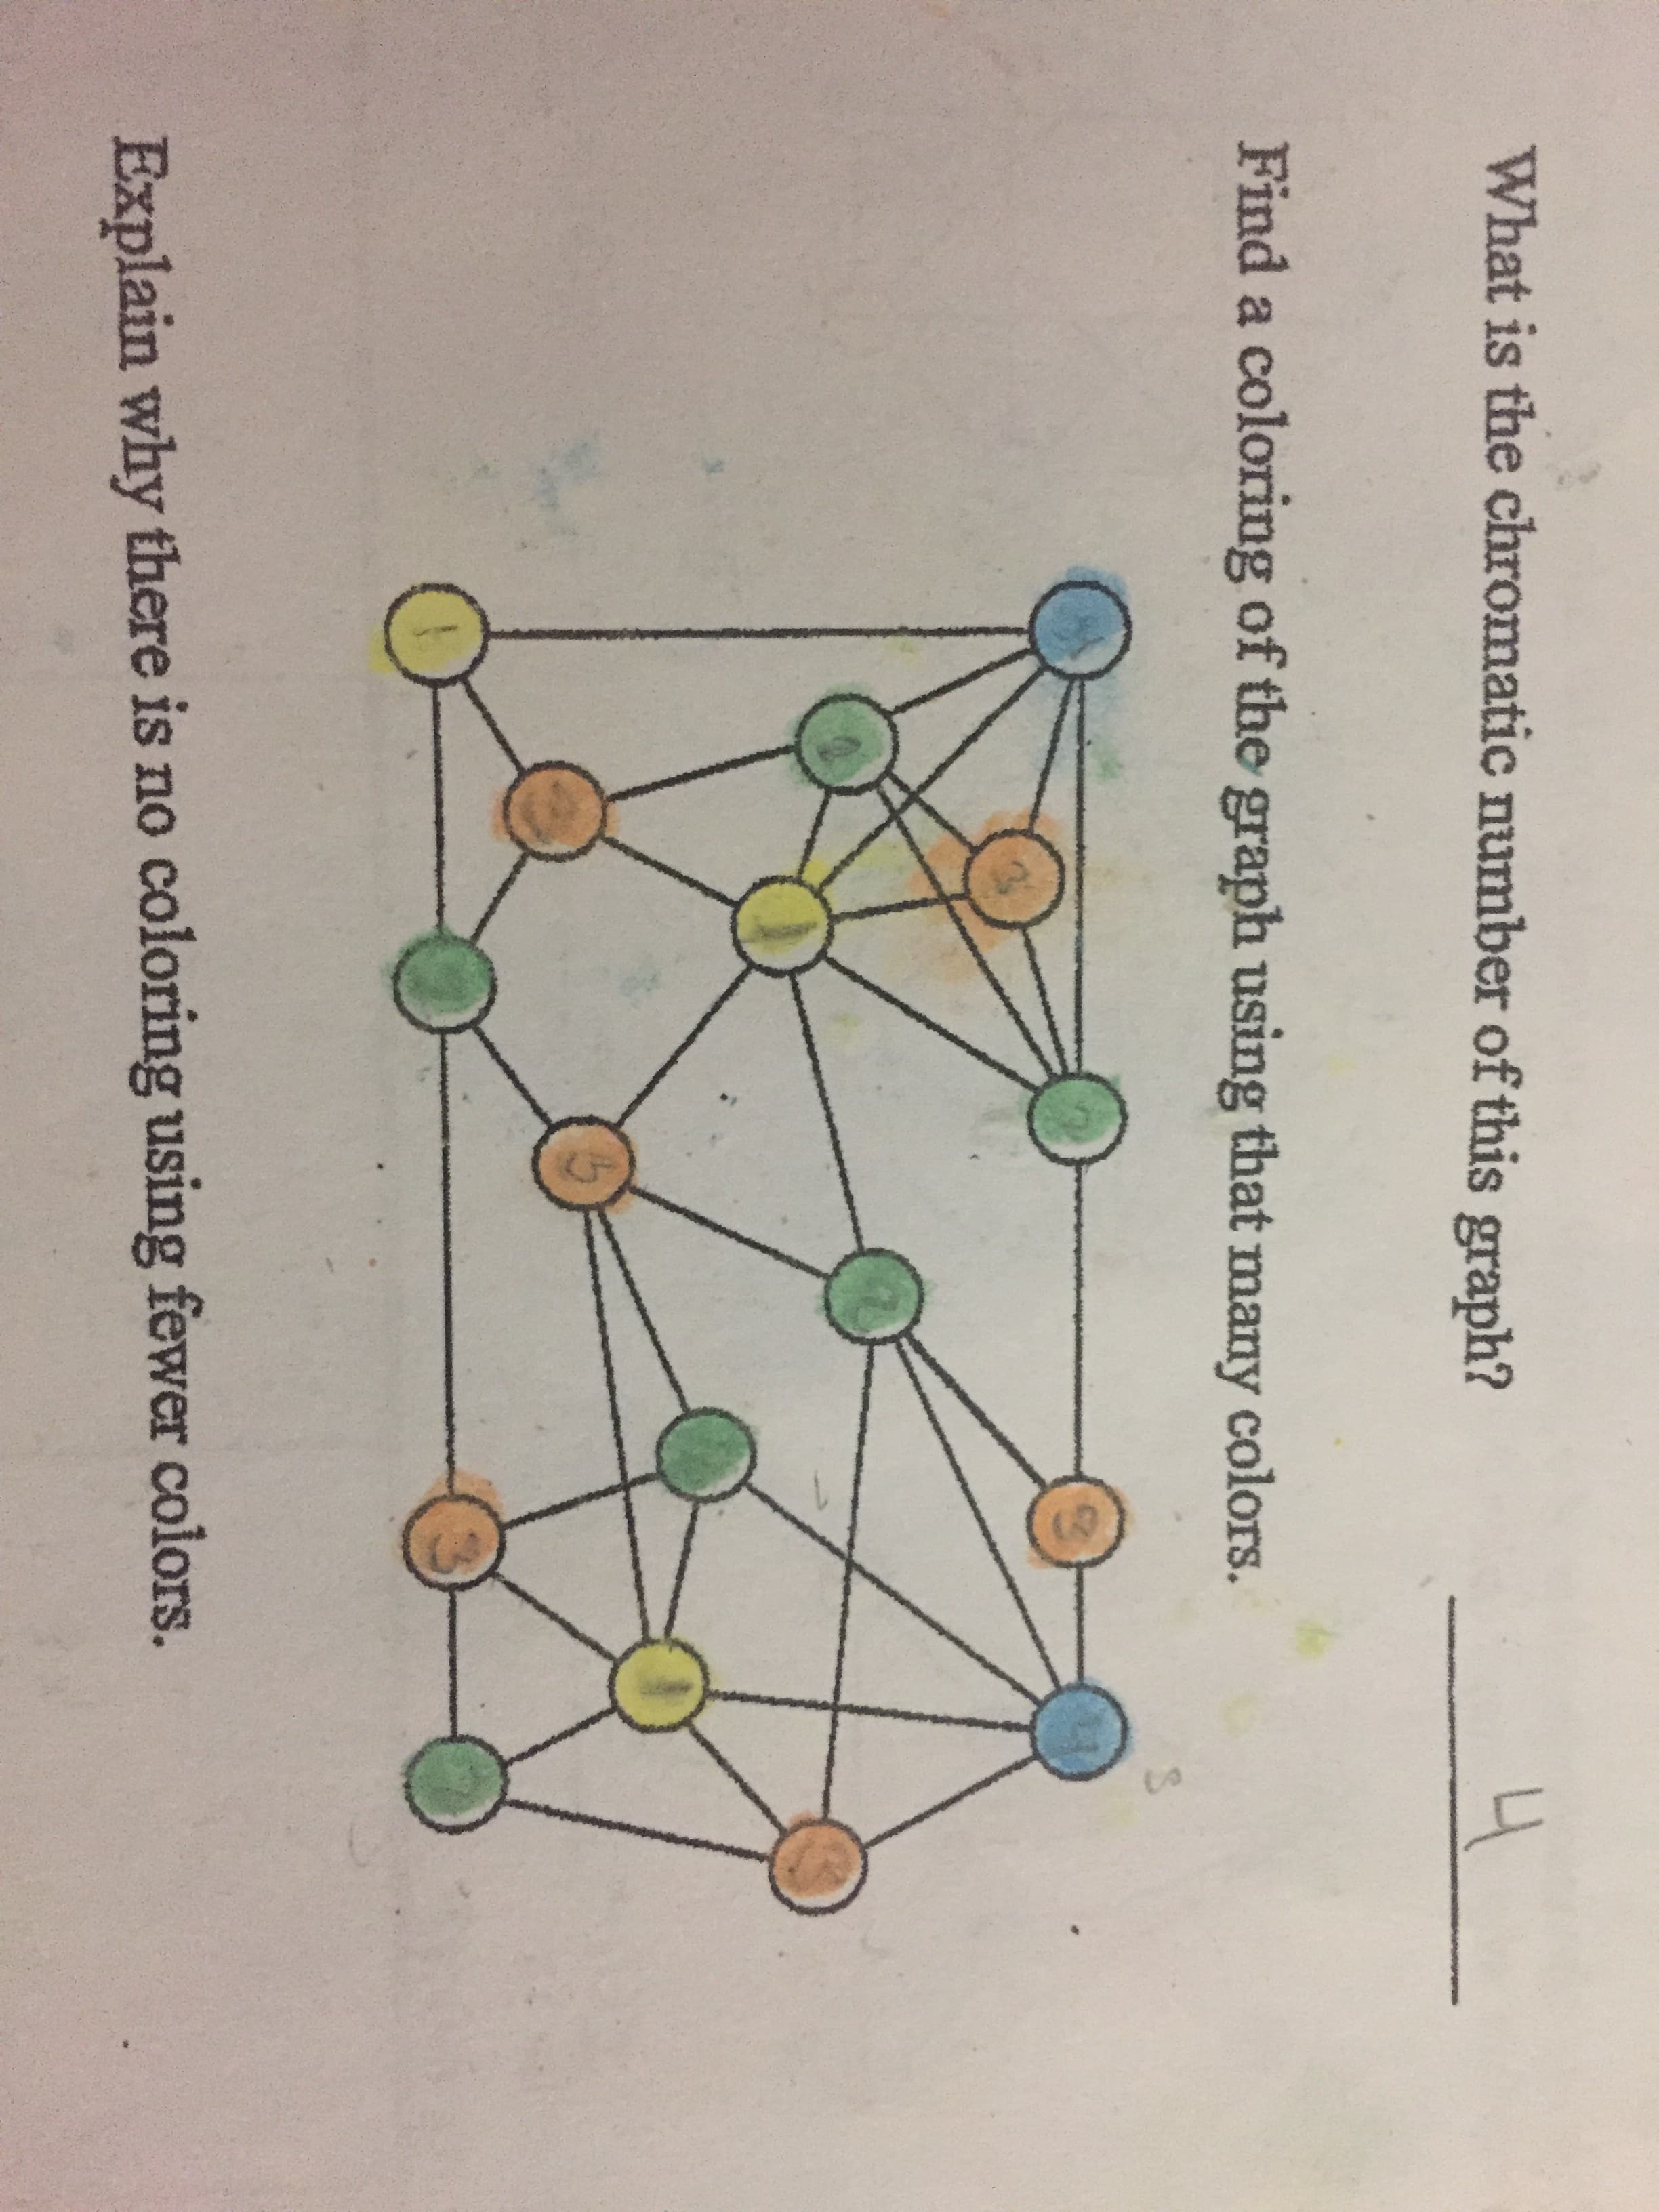 What is the chromatic number of this graph?
Find a coloring of the graph using that many colors.
Explain why there is no coloring using fewer colors.
